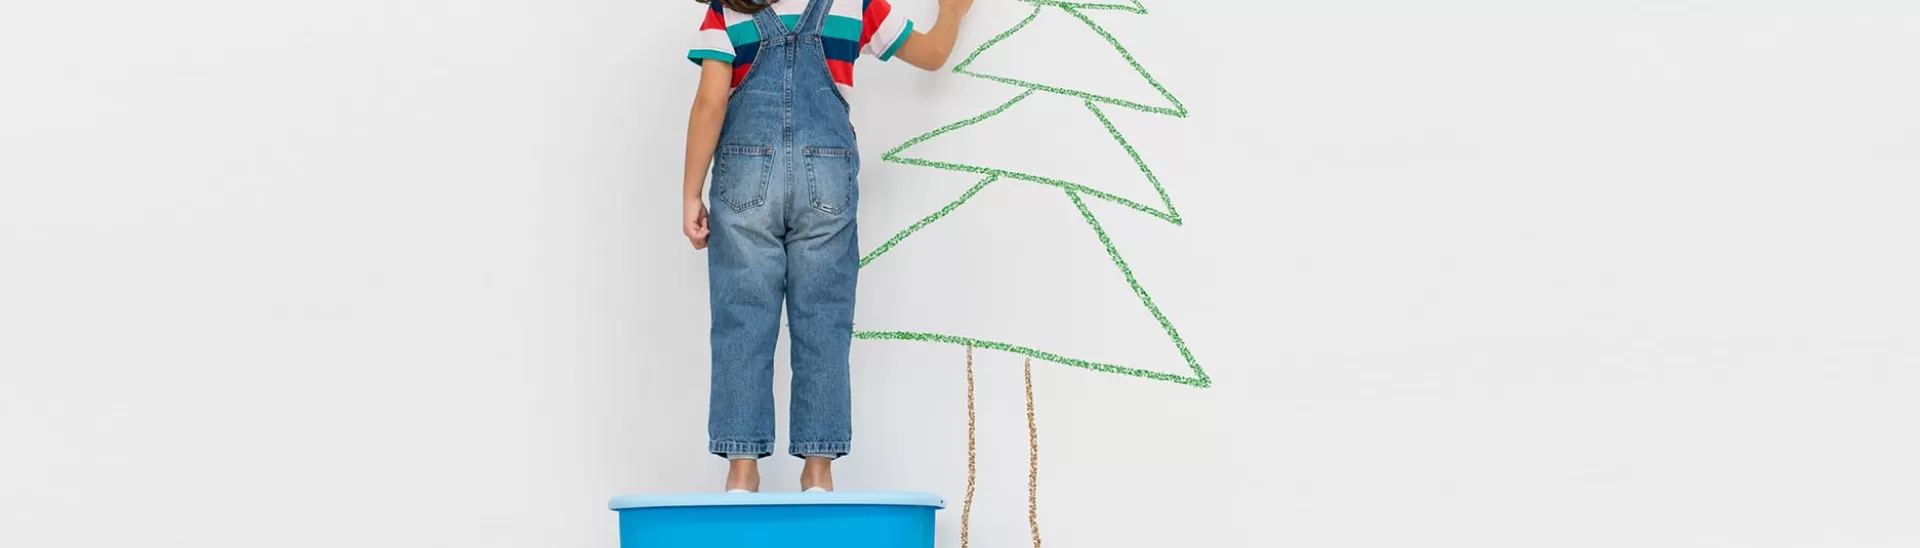 Involve Your Kids and Decorate Your Children's Room This Festive Season with These 5 Décor Ideas